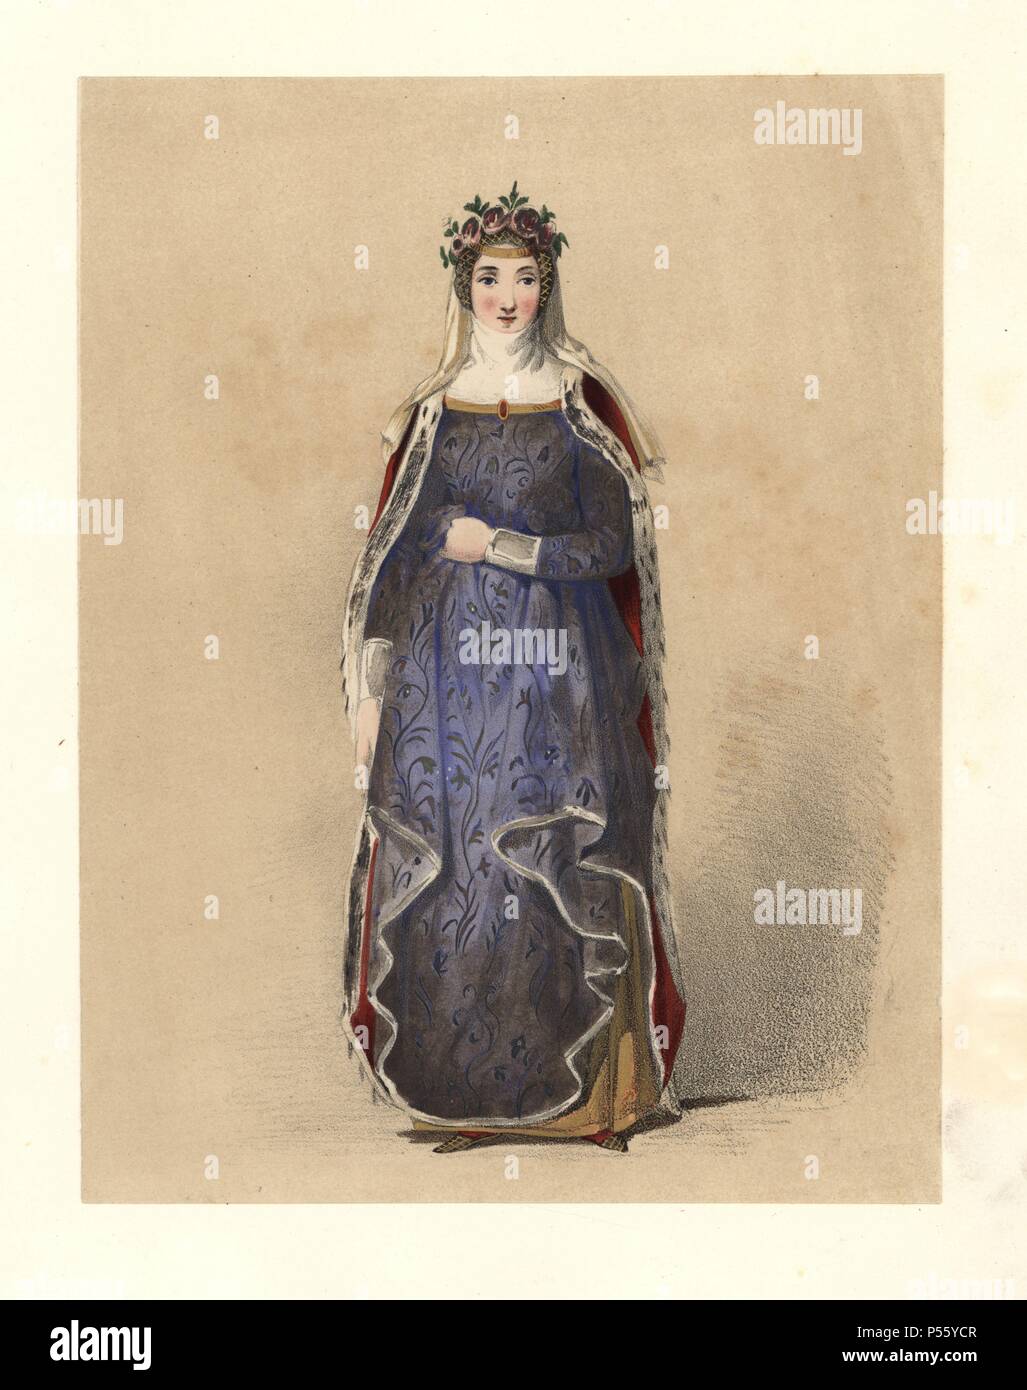 Dress of the reign of King Henry III, 12161272. She wear a crimson fur-lined mantle over a blue and white damask dress, crown of roses, veil and wimple. Based on an effigy of Aveline, Countess of Lancaster, in Westminster Abbey, 13th century romance “With damask white and Azure blue/Well diapered with lilies new.” Handcoloured lithograph from 'Costumes of British Ladies from the Time of William the First to the Reign of Queen Victoria,” London, Dickinson & Son, 1840. 48 mounted plates of women's fashion from 1066 to 1840 based on effigies, manuscripts, portraits, prints and literary descripti Stock Photo